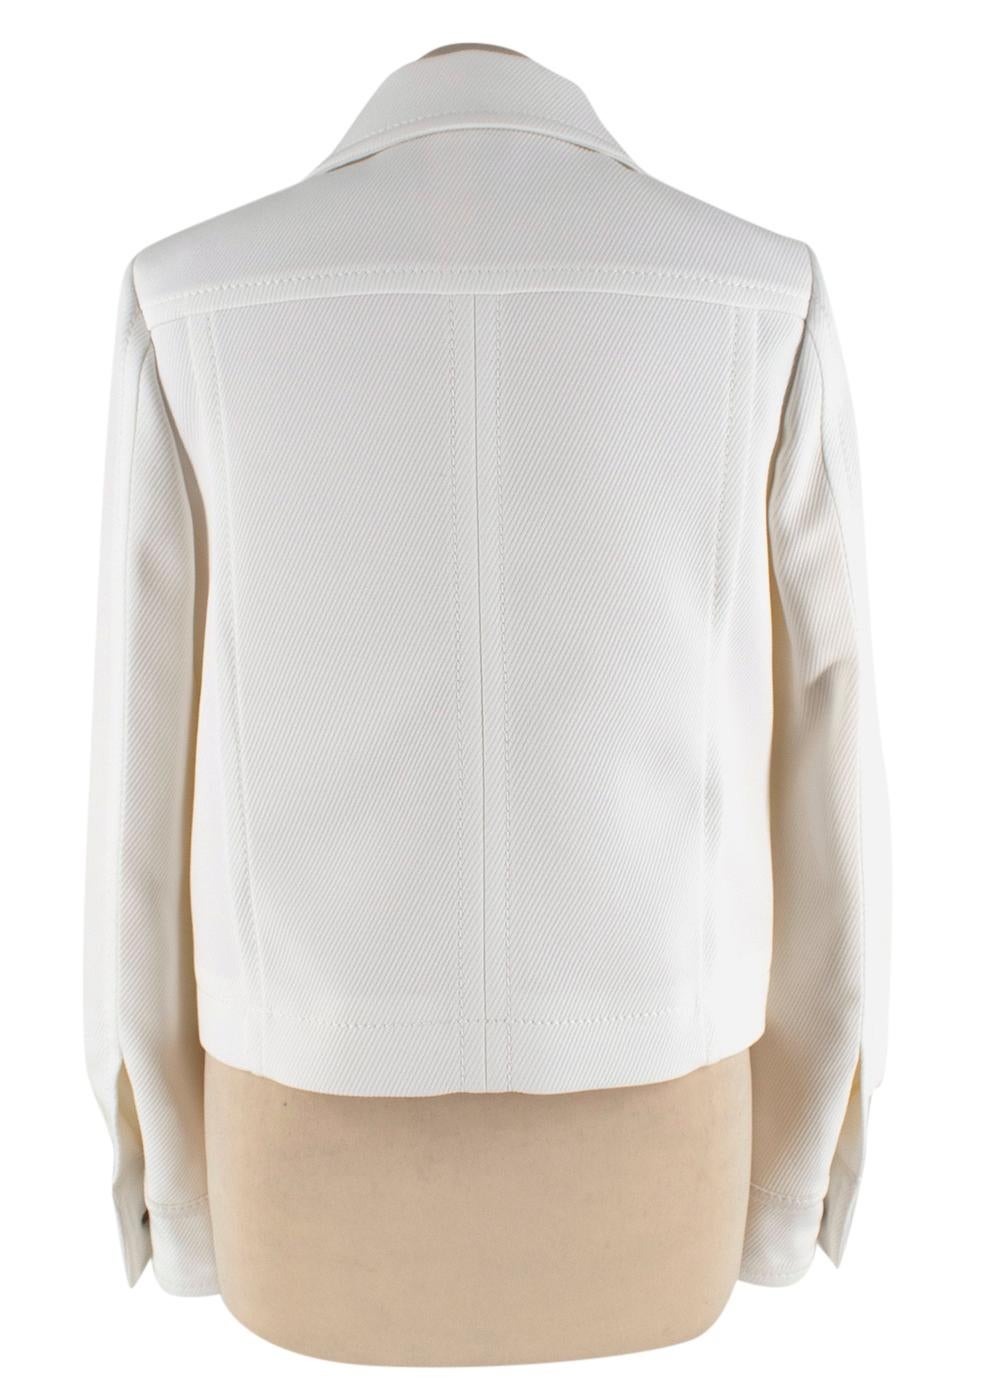 Miu Miu Ivory Tailored Jacket with Silver Buttons US4 In Excellent Condition For Sale In London, GB